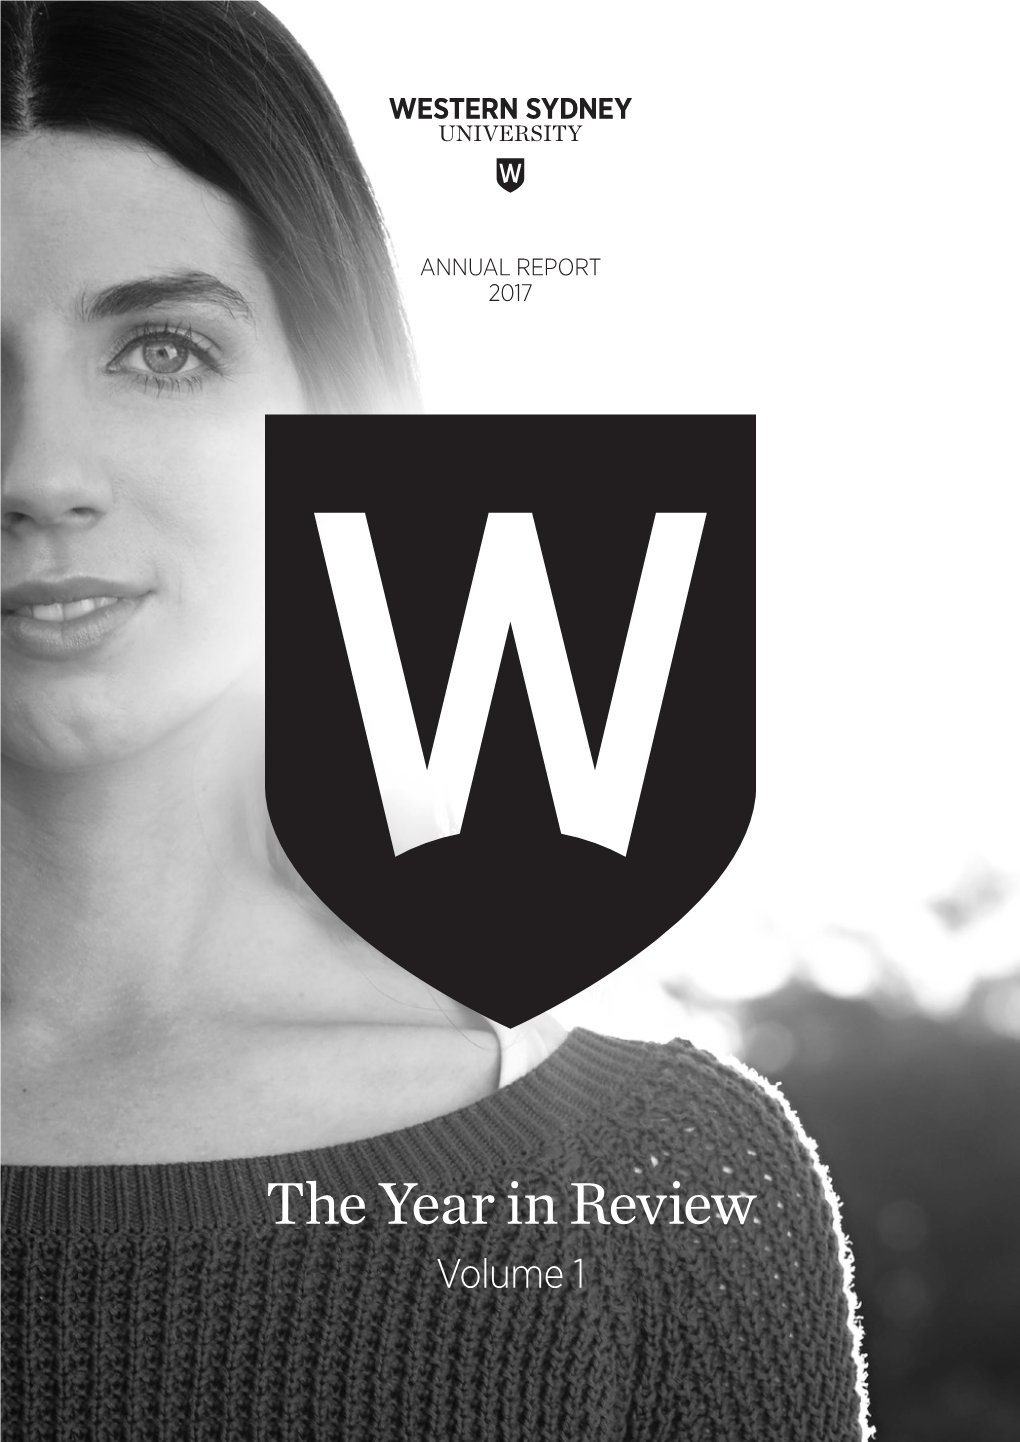 The Year in Review Volume 1 ANNUAL REPORT 2017